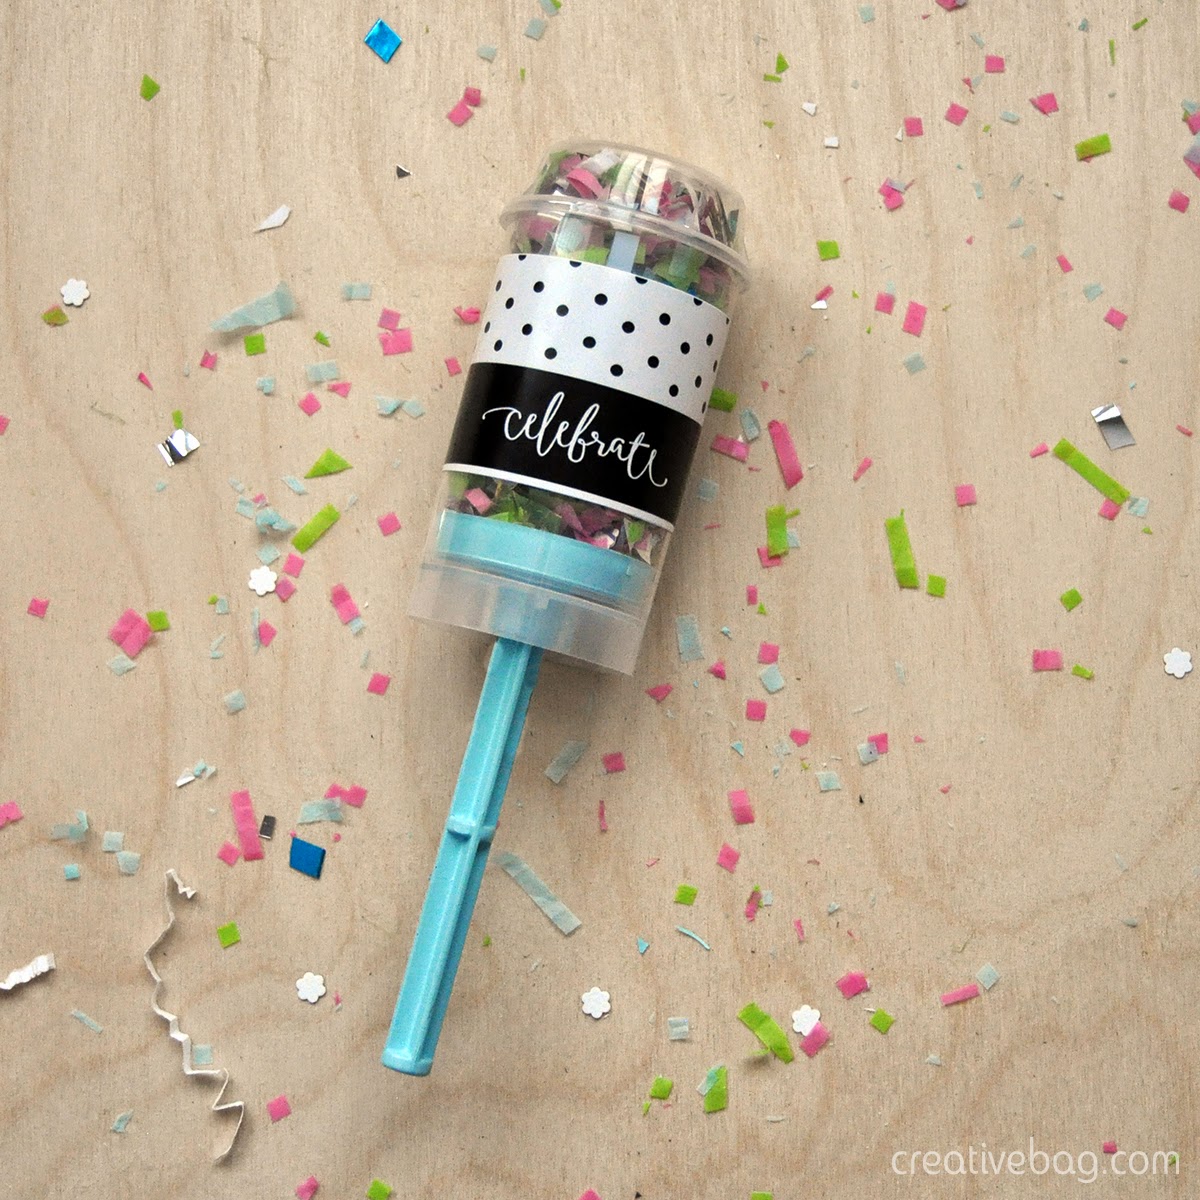 diy confetti poppers and make your own confetti | Creative Bag